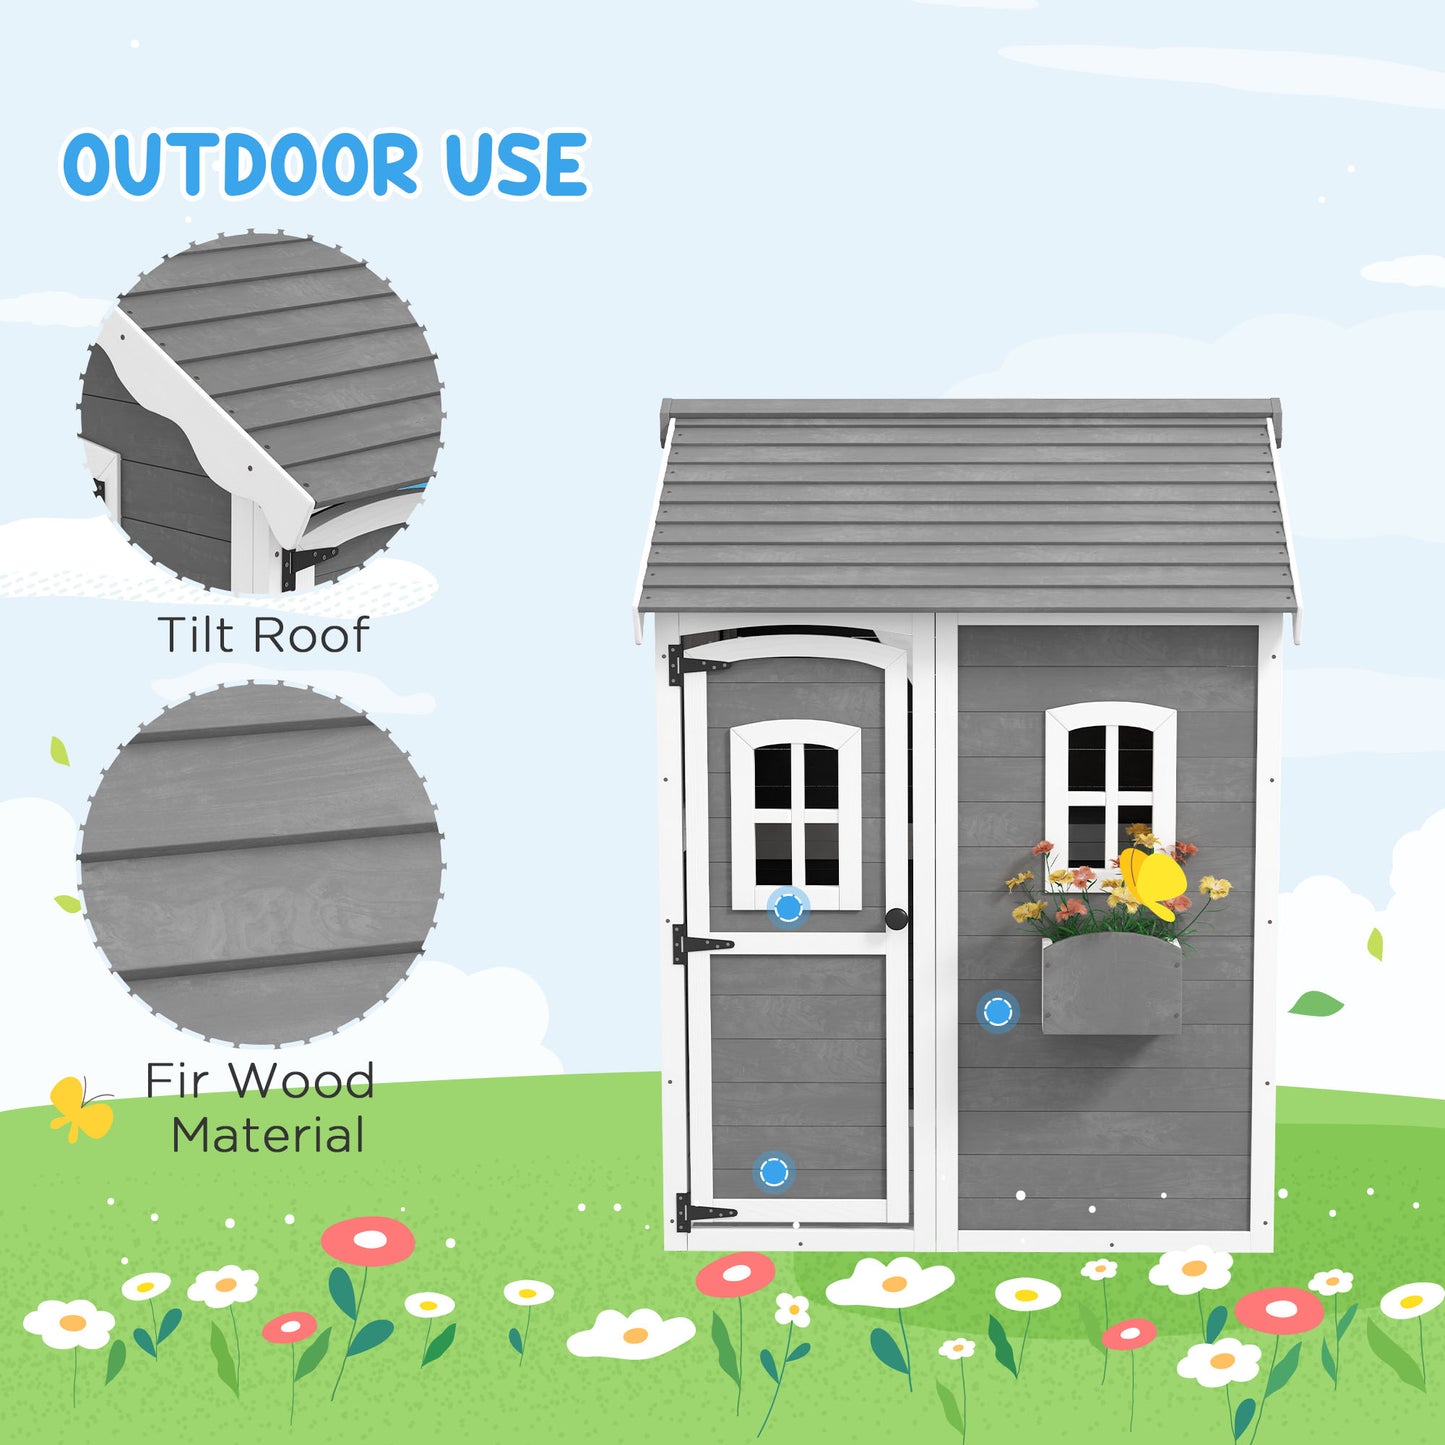 Outsunny Wooden Playhouse for Kids with Doors, Windows, Plant Box, Floors, for 3-8 Years Old, Garden, Lawn, Patio, Grey